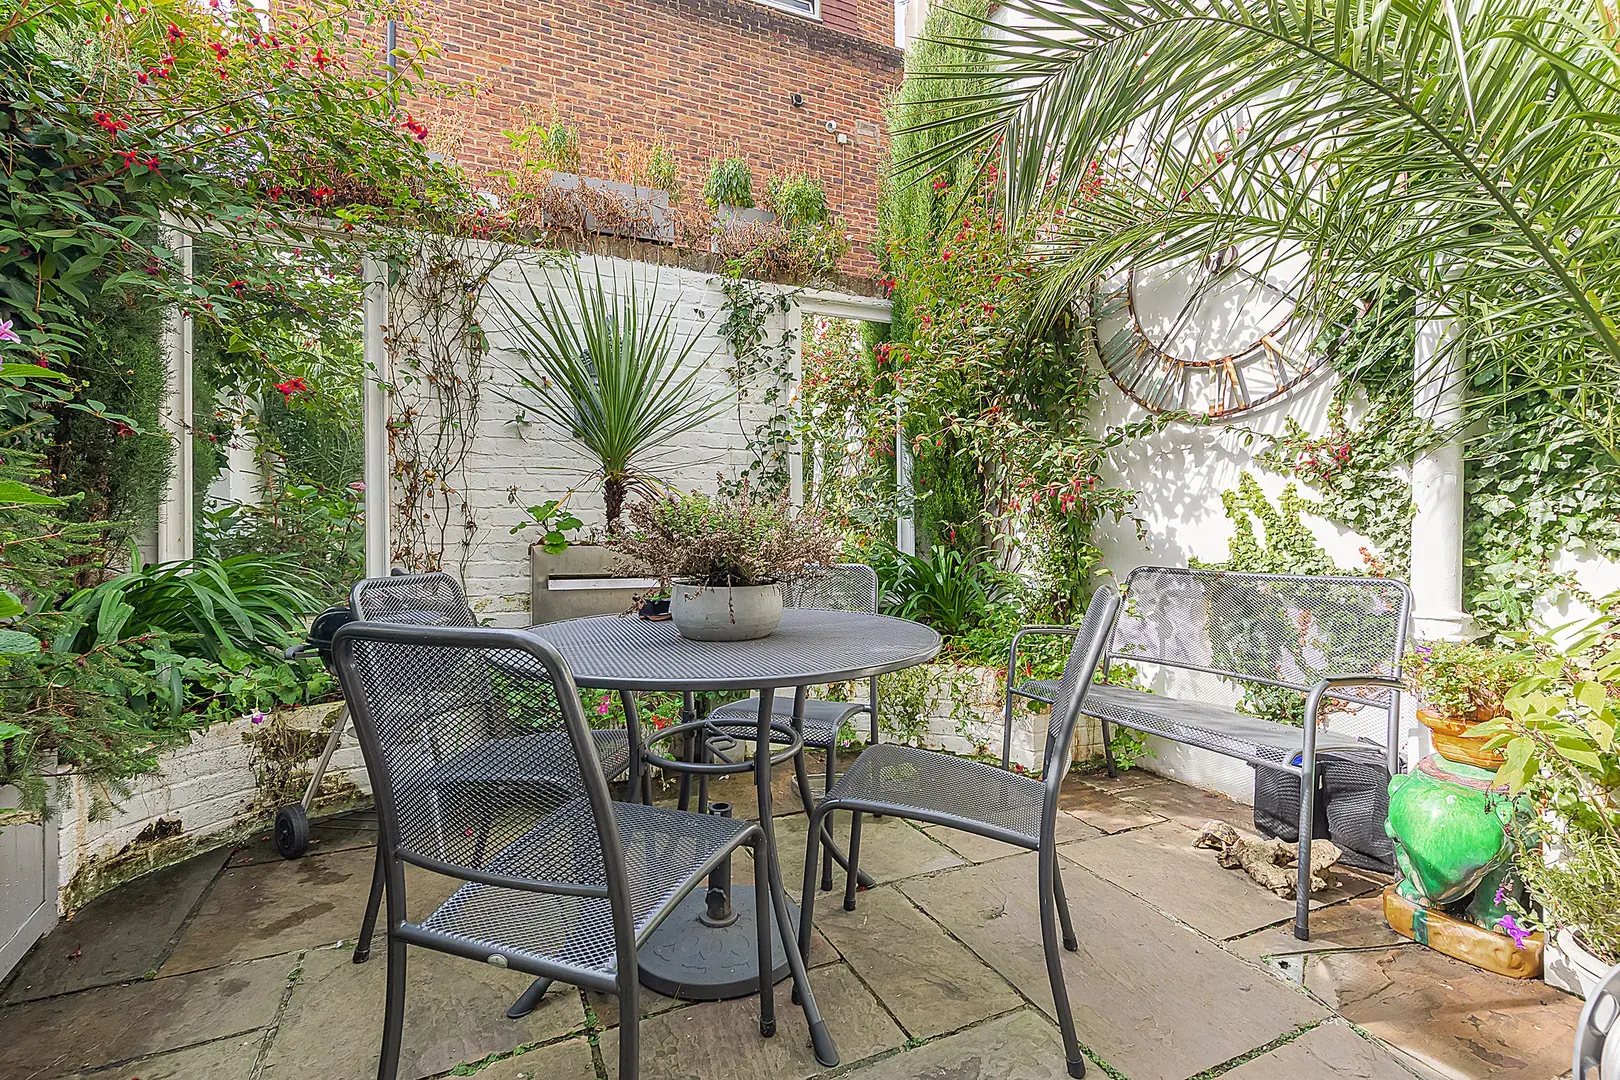 Perrins Lane, holiday home in Hampstead, London